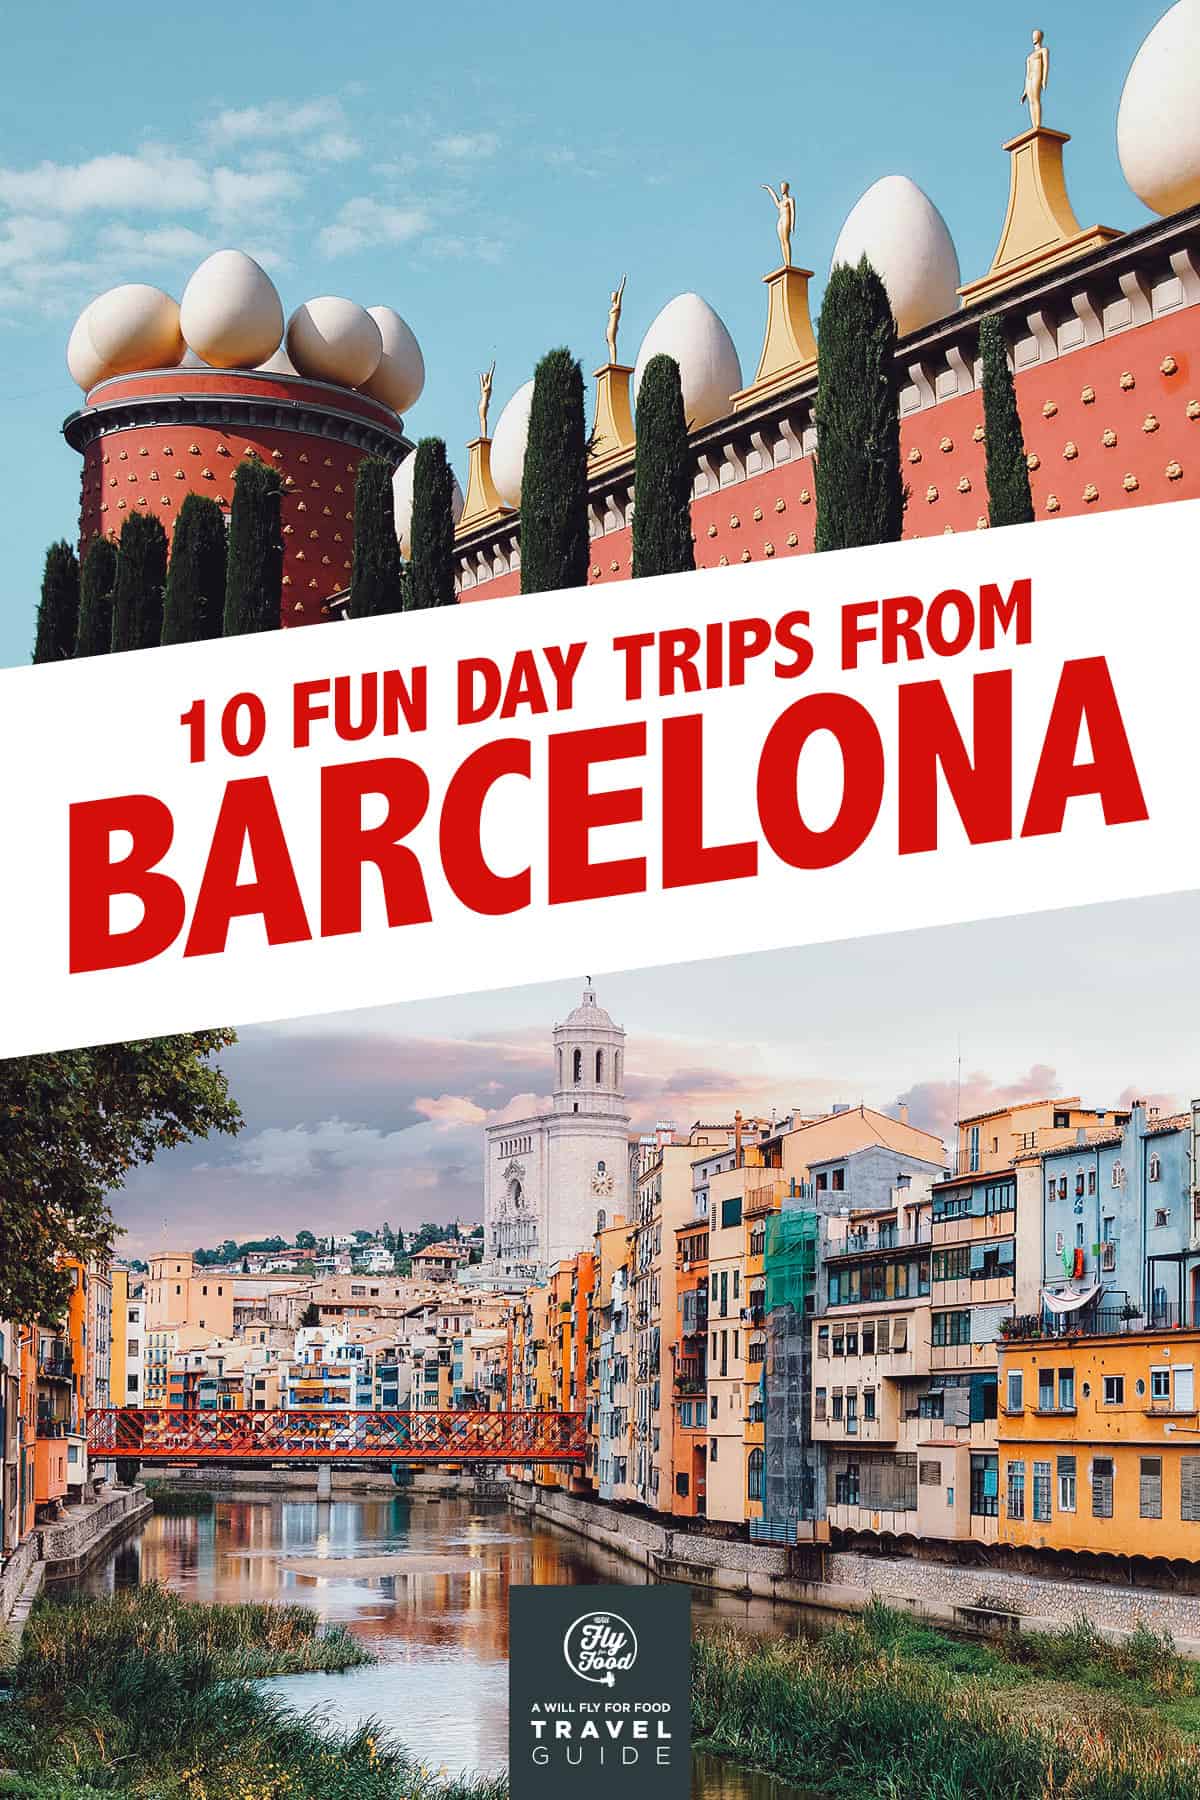 7 day trips to spain